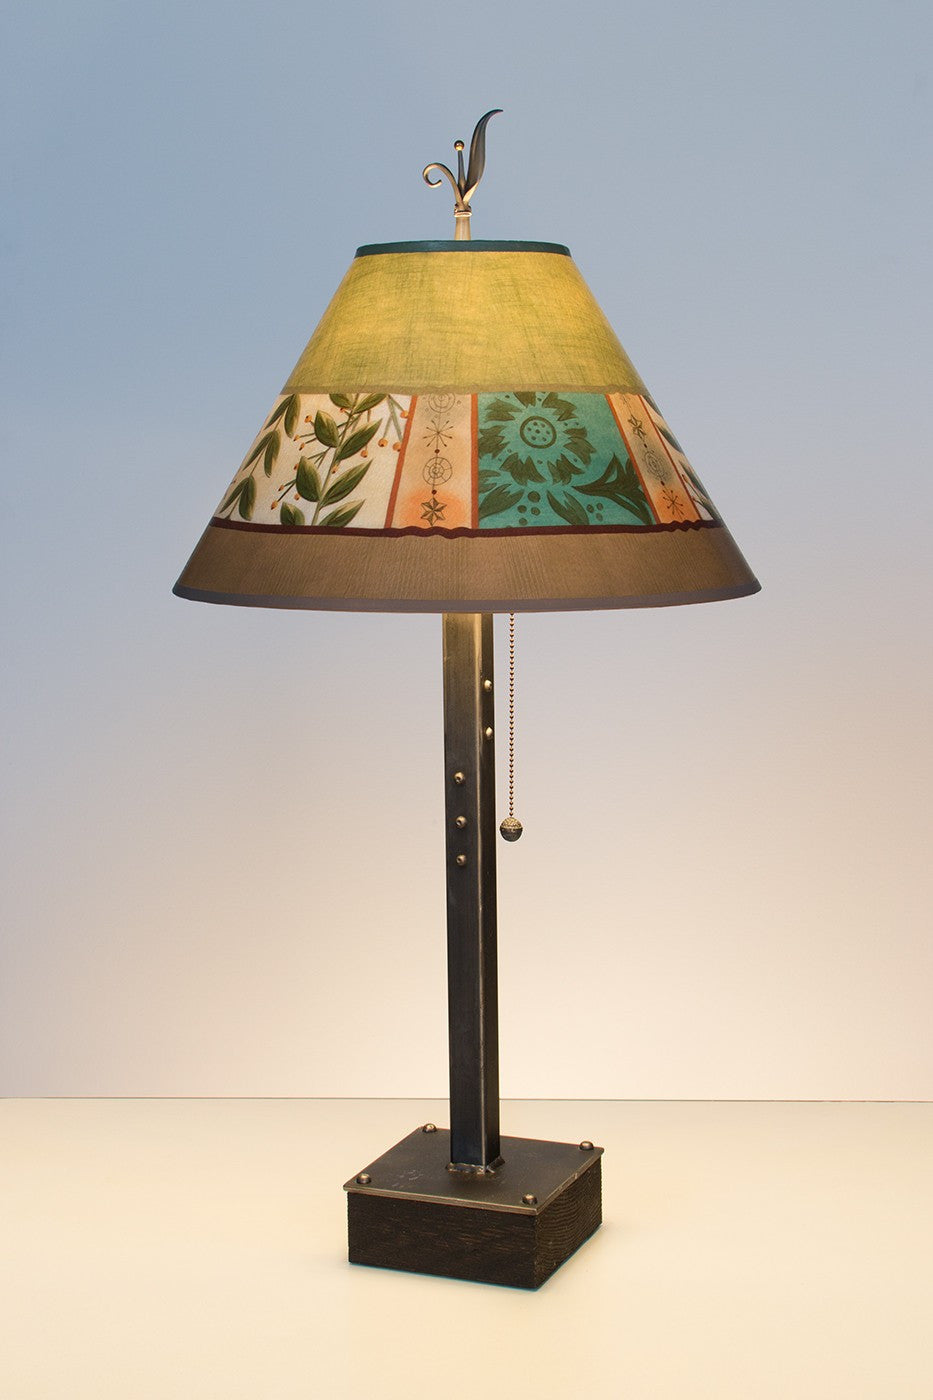 Steel Table Lamp on Wood Base with Large, Conical Shade in "Spring Medley: Apple" Design - True North Gallery